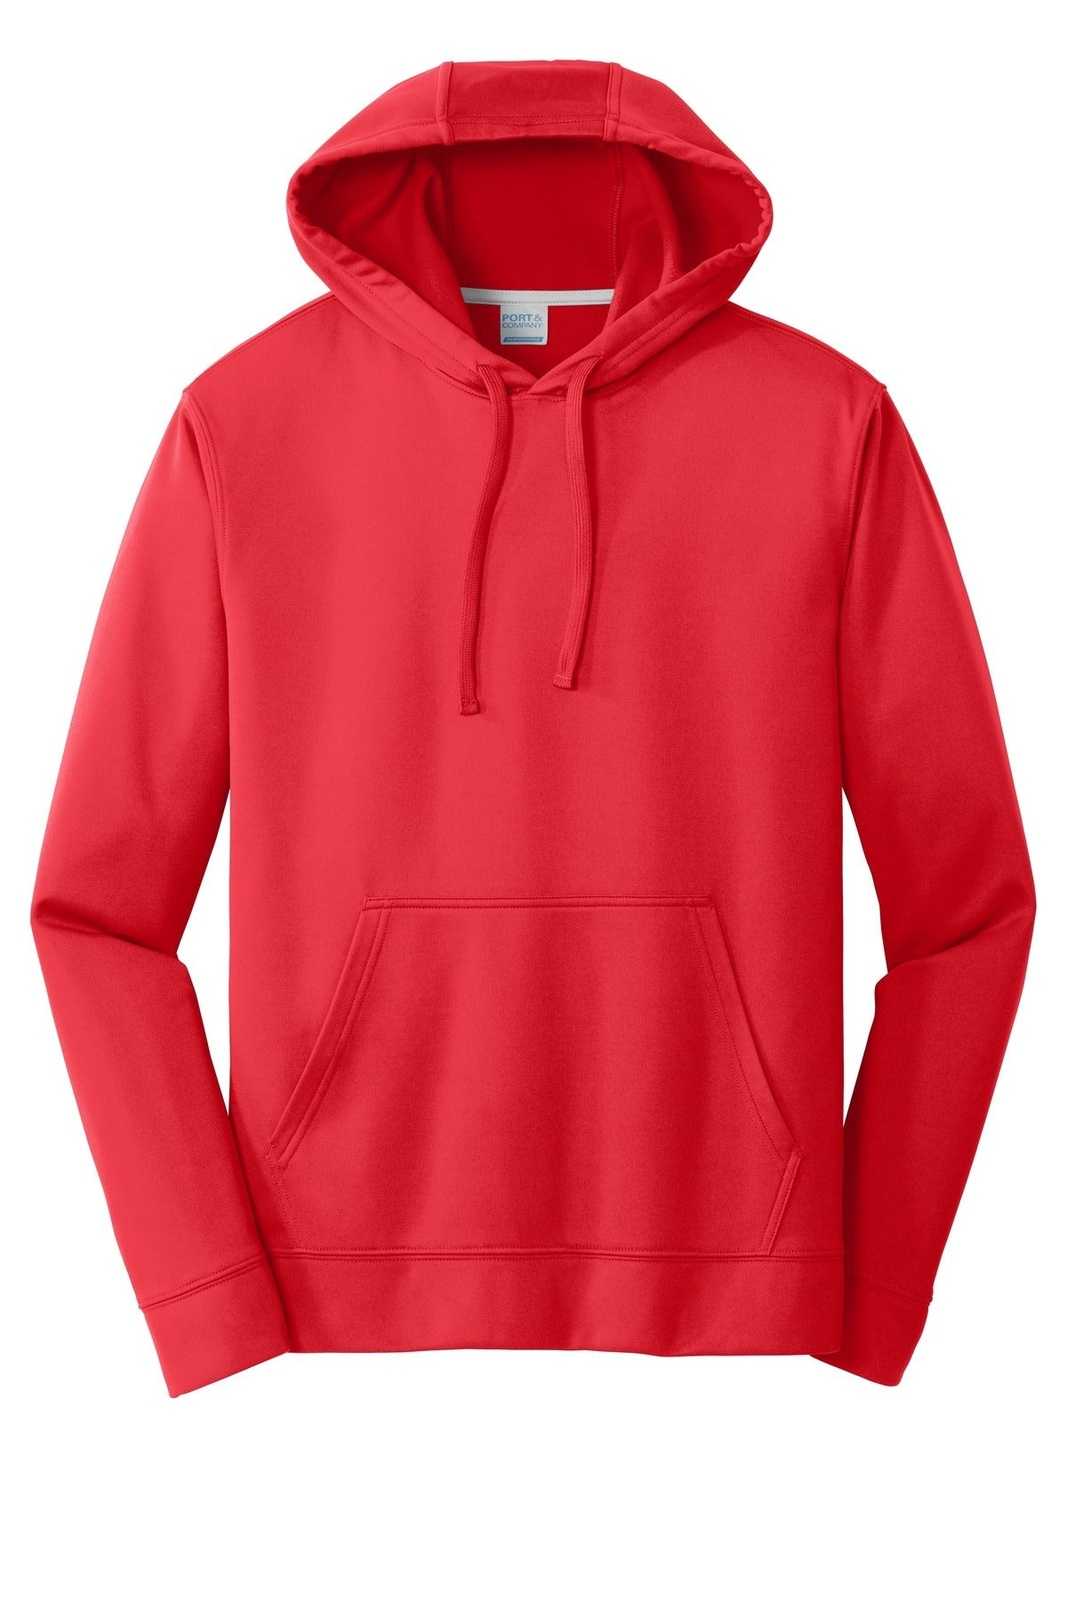 Port &amp; Company PC590H Performance Fleece Pullover Hooded Sweatshirt - Red - HIT a Double - 5